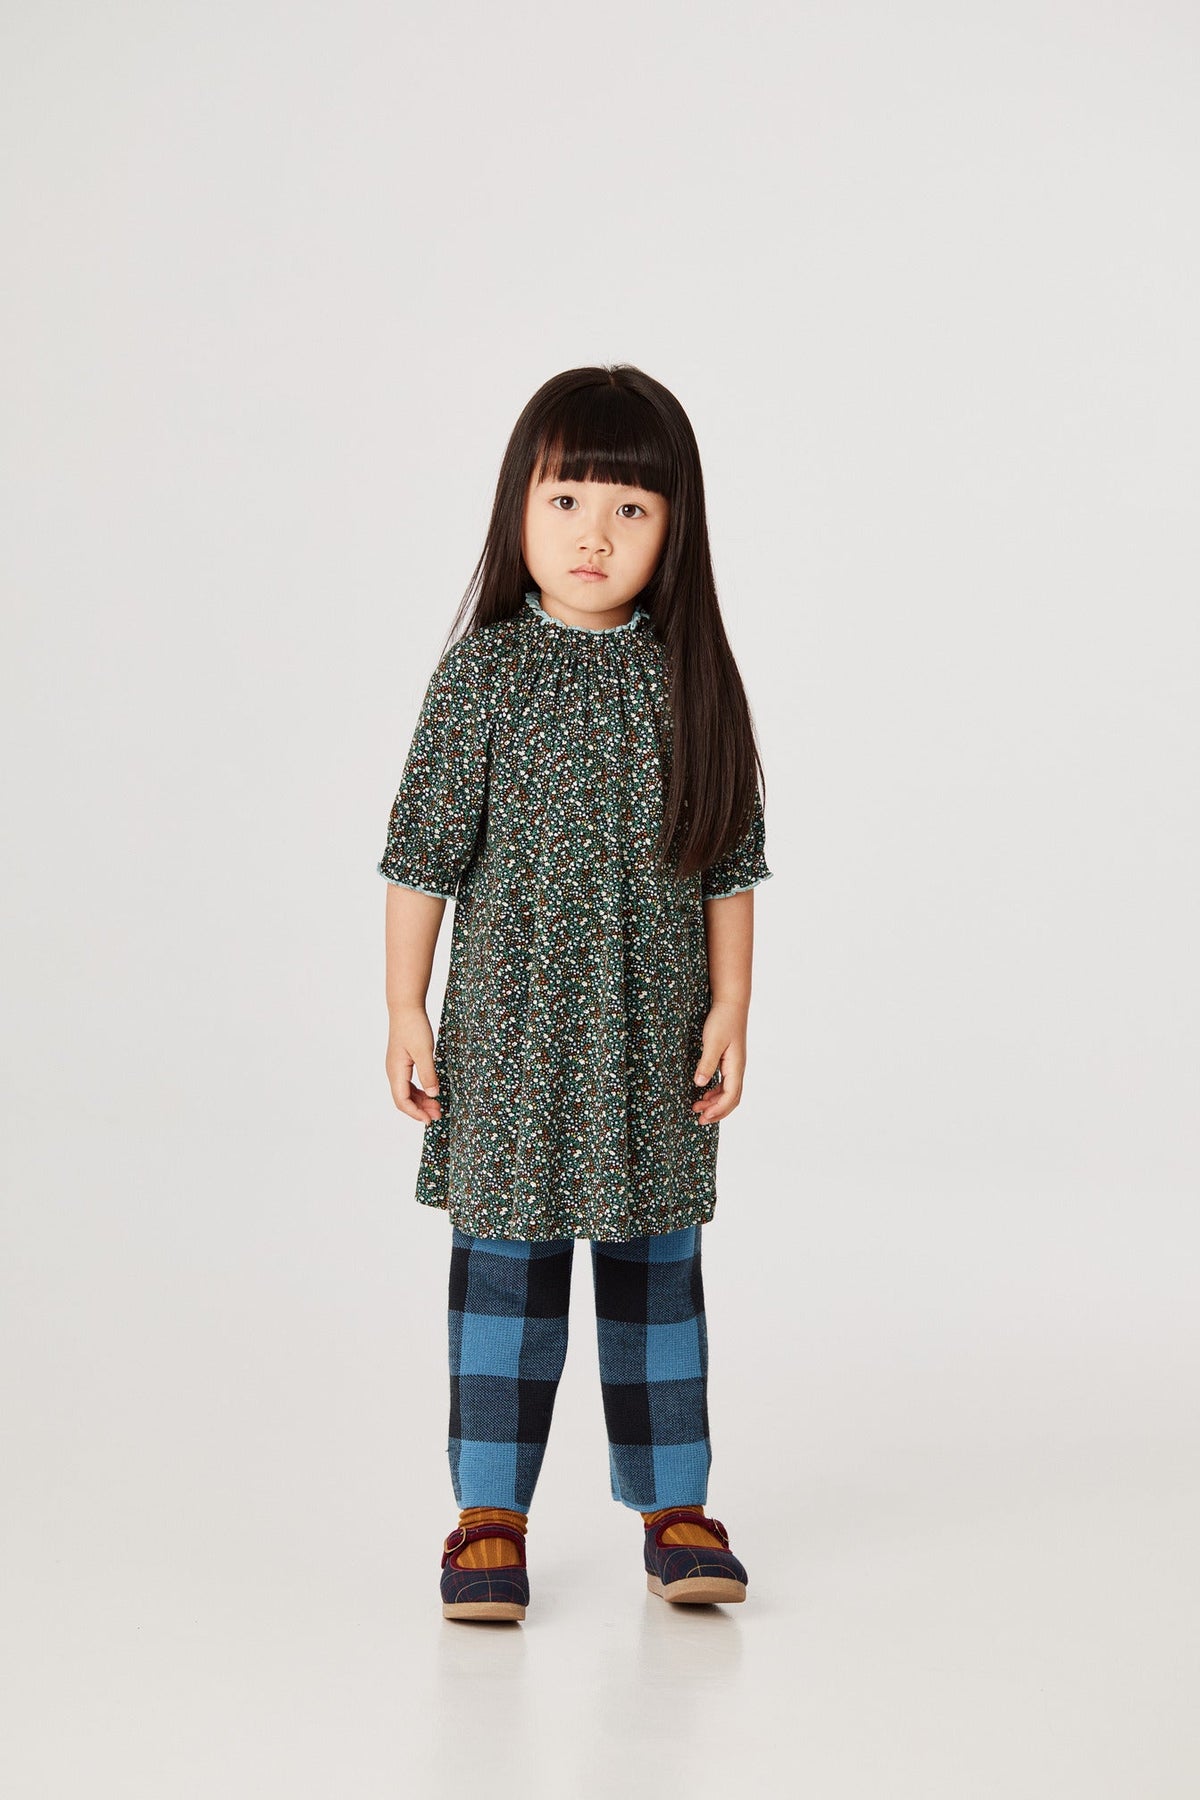 Ruffle Dress - Emerald Mini Floral+Model is 41 inches tall, 38lbs, wearing a size 4-5y